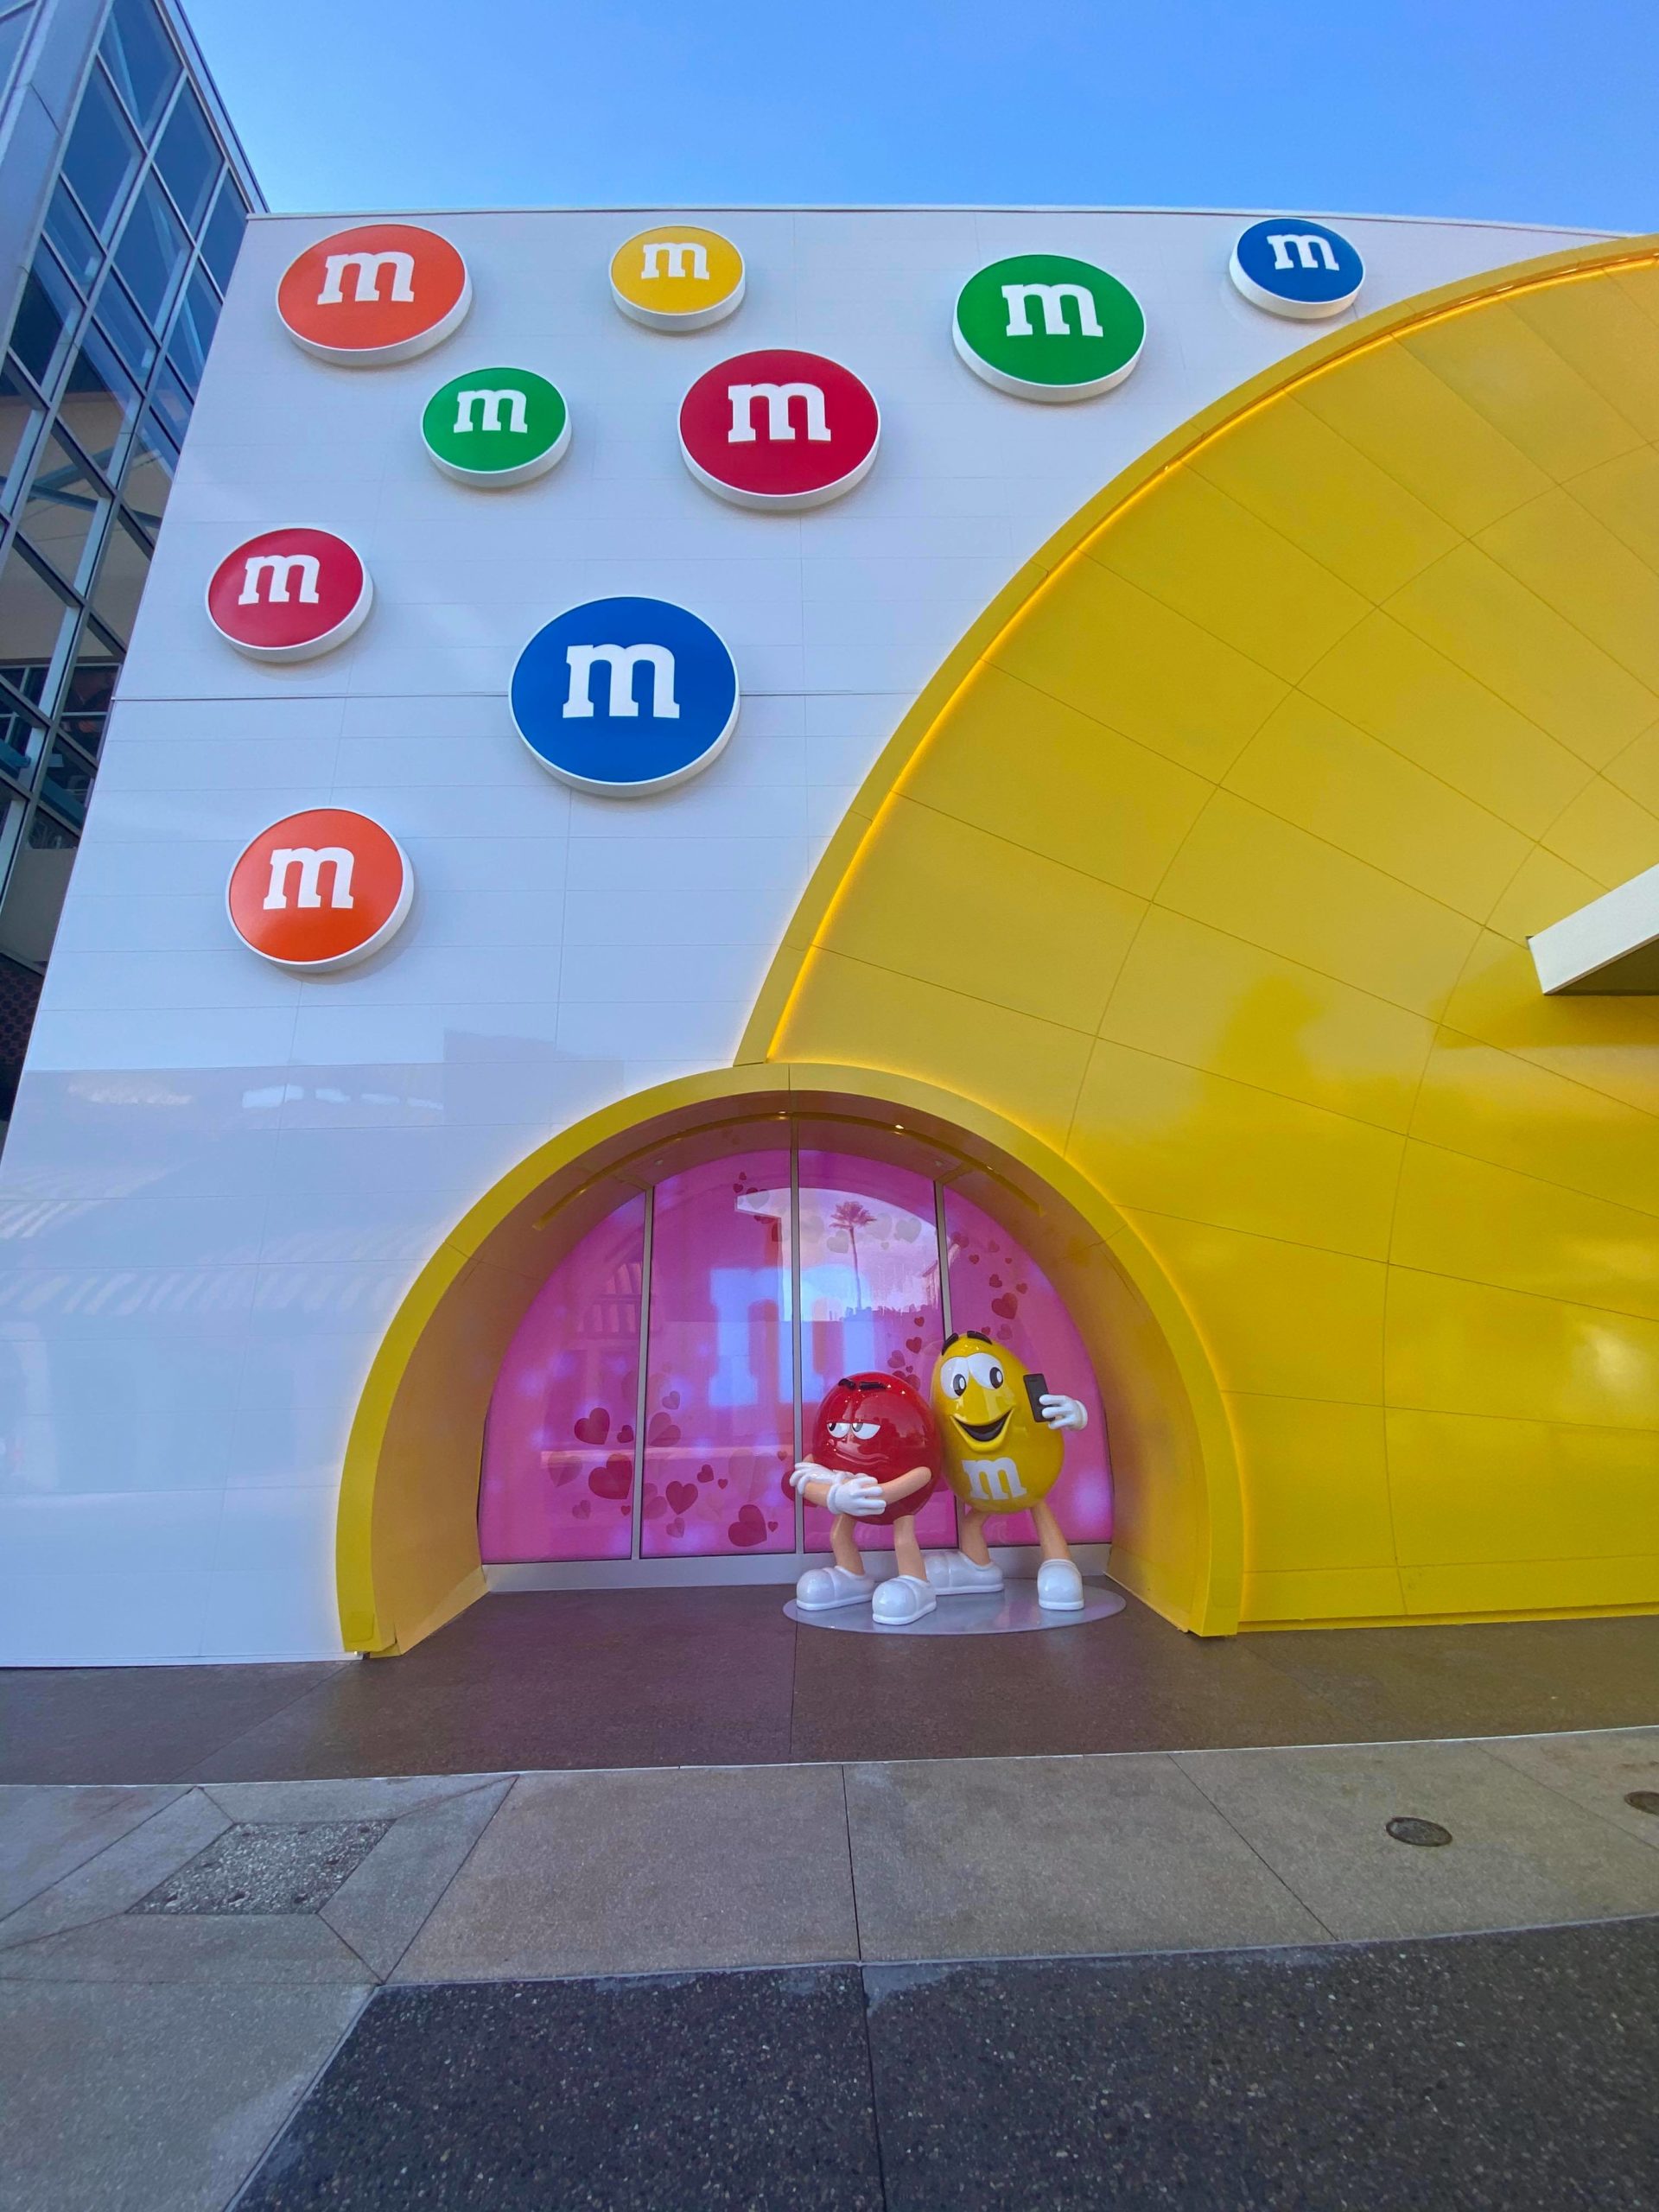 A New M&M's Store Opened In Disney Springs